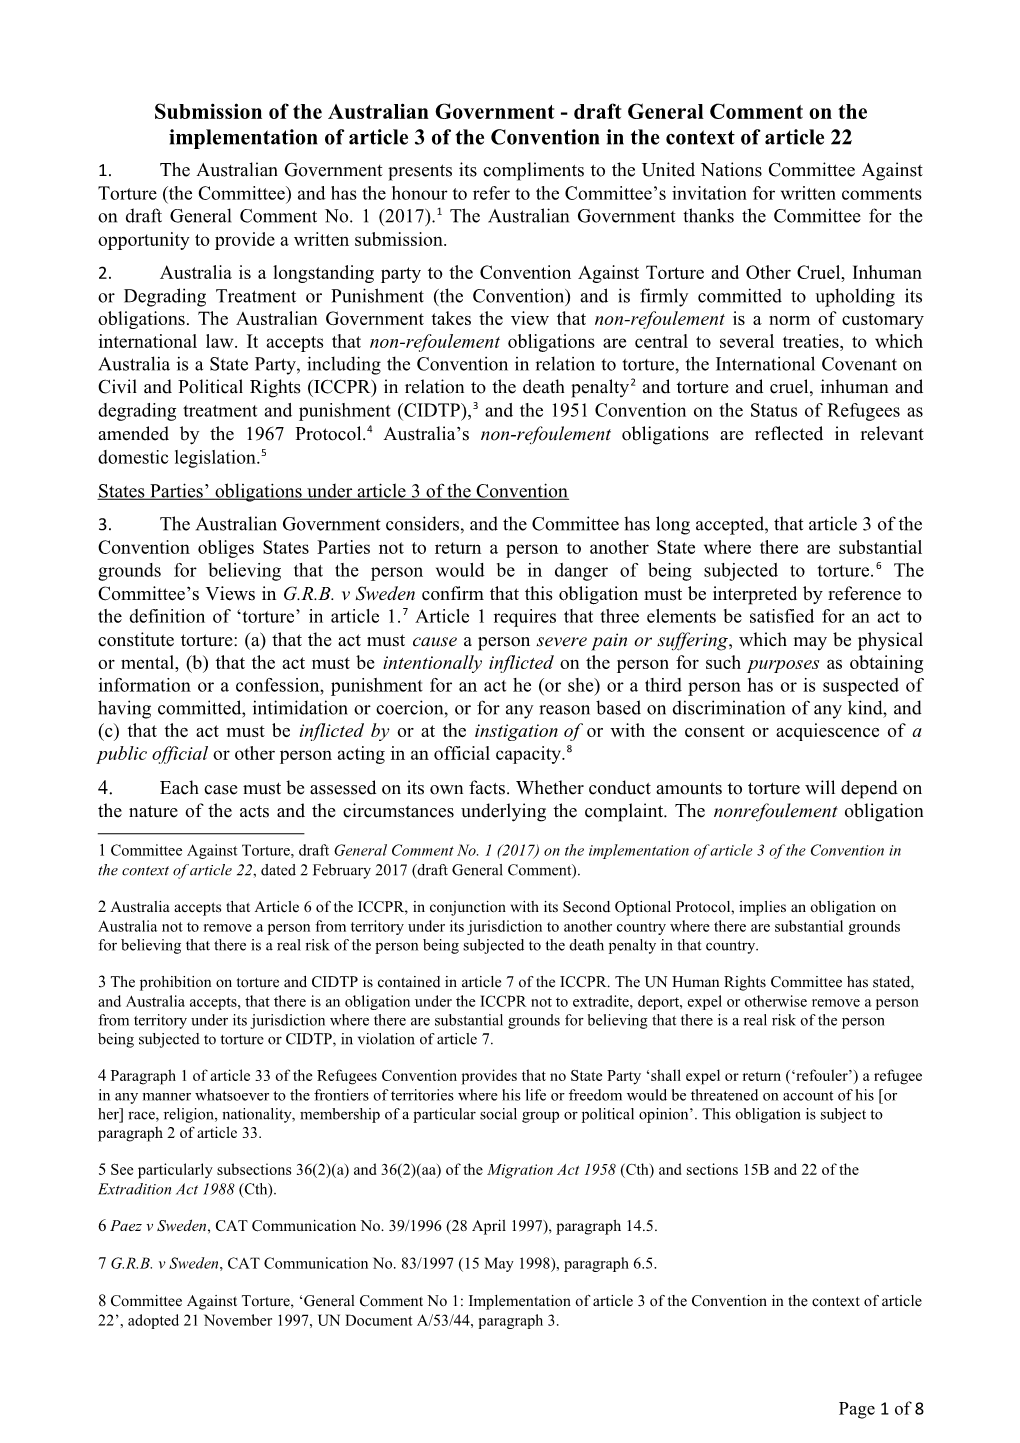 Submission of the Australian Government - Draft General Comment on the Implementation